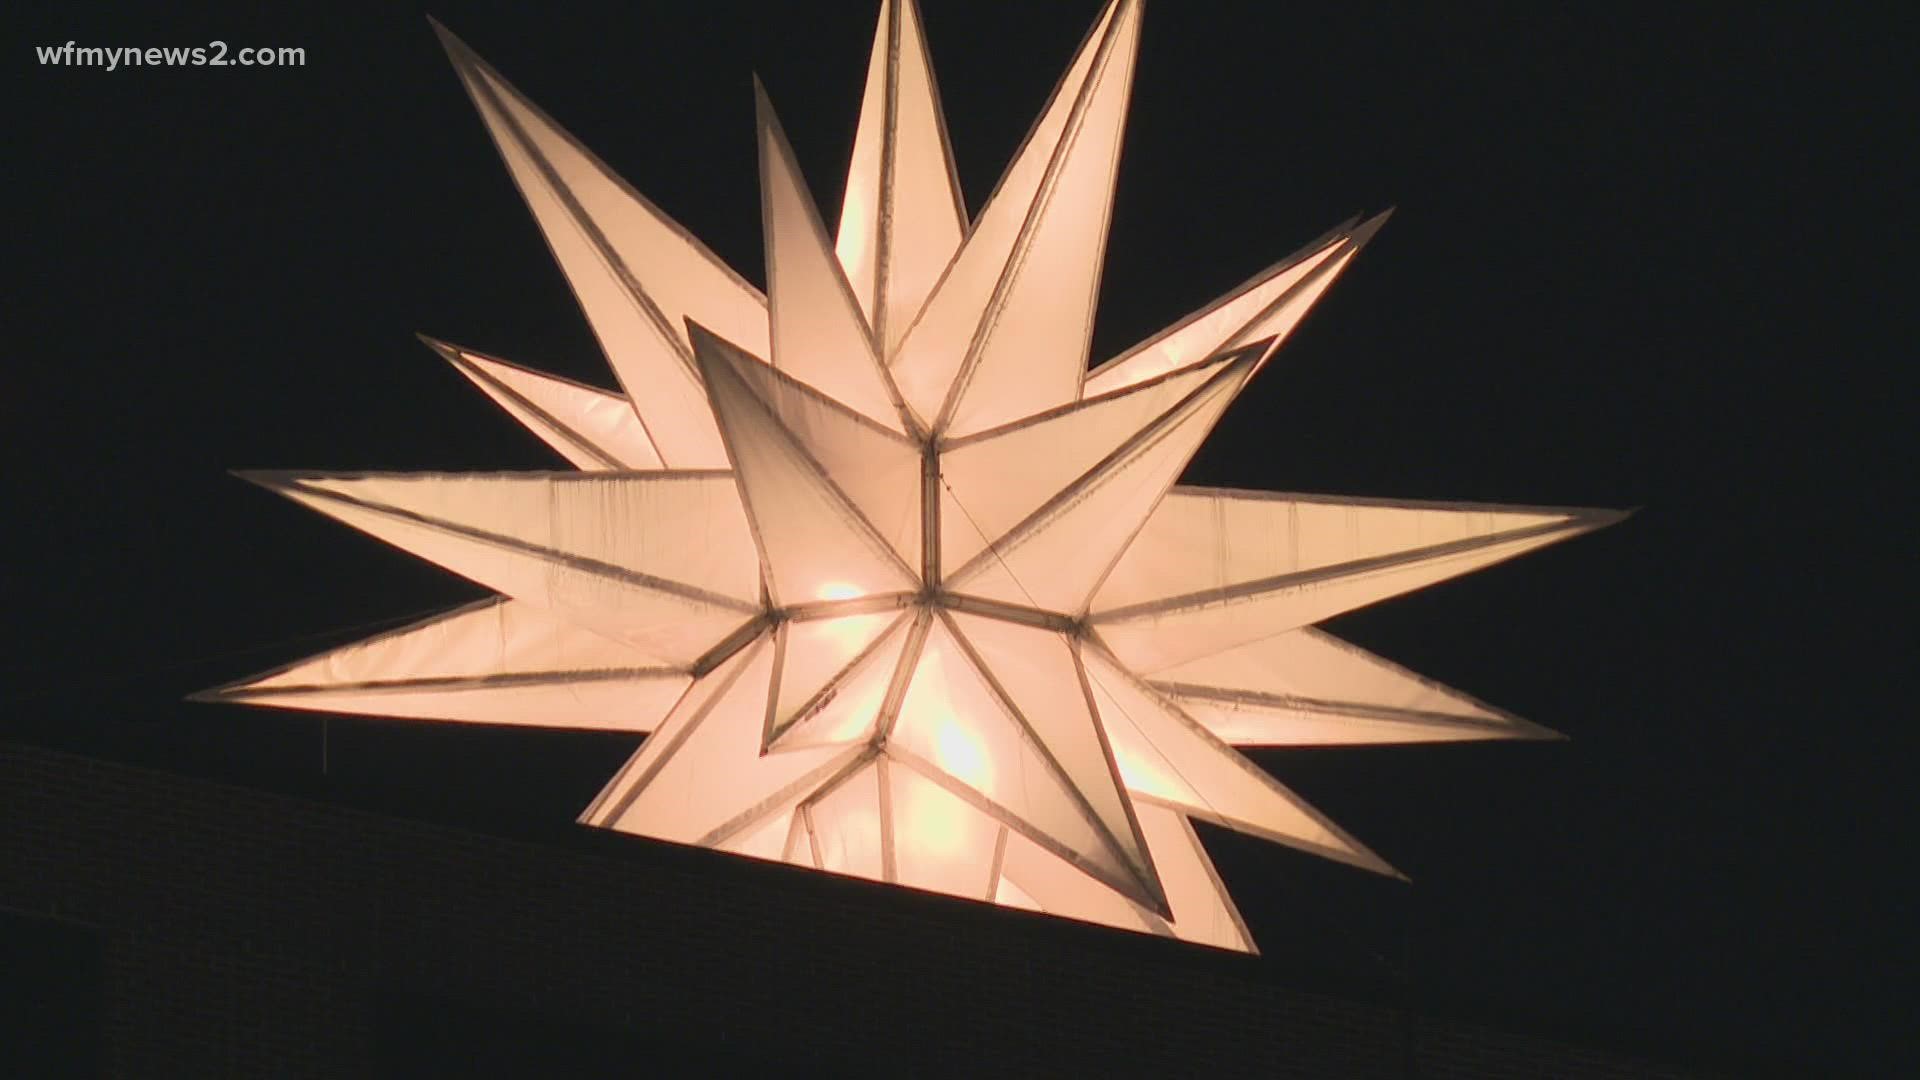 It marked the 29th year they've lighted the star over Winston-Salem.